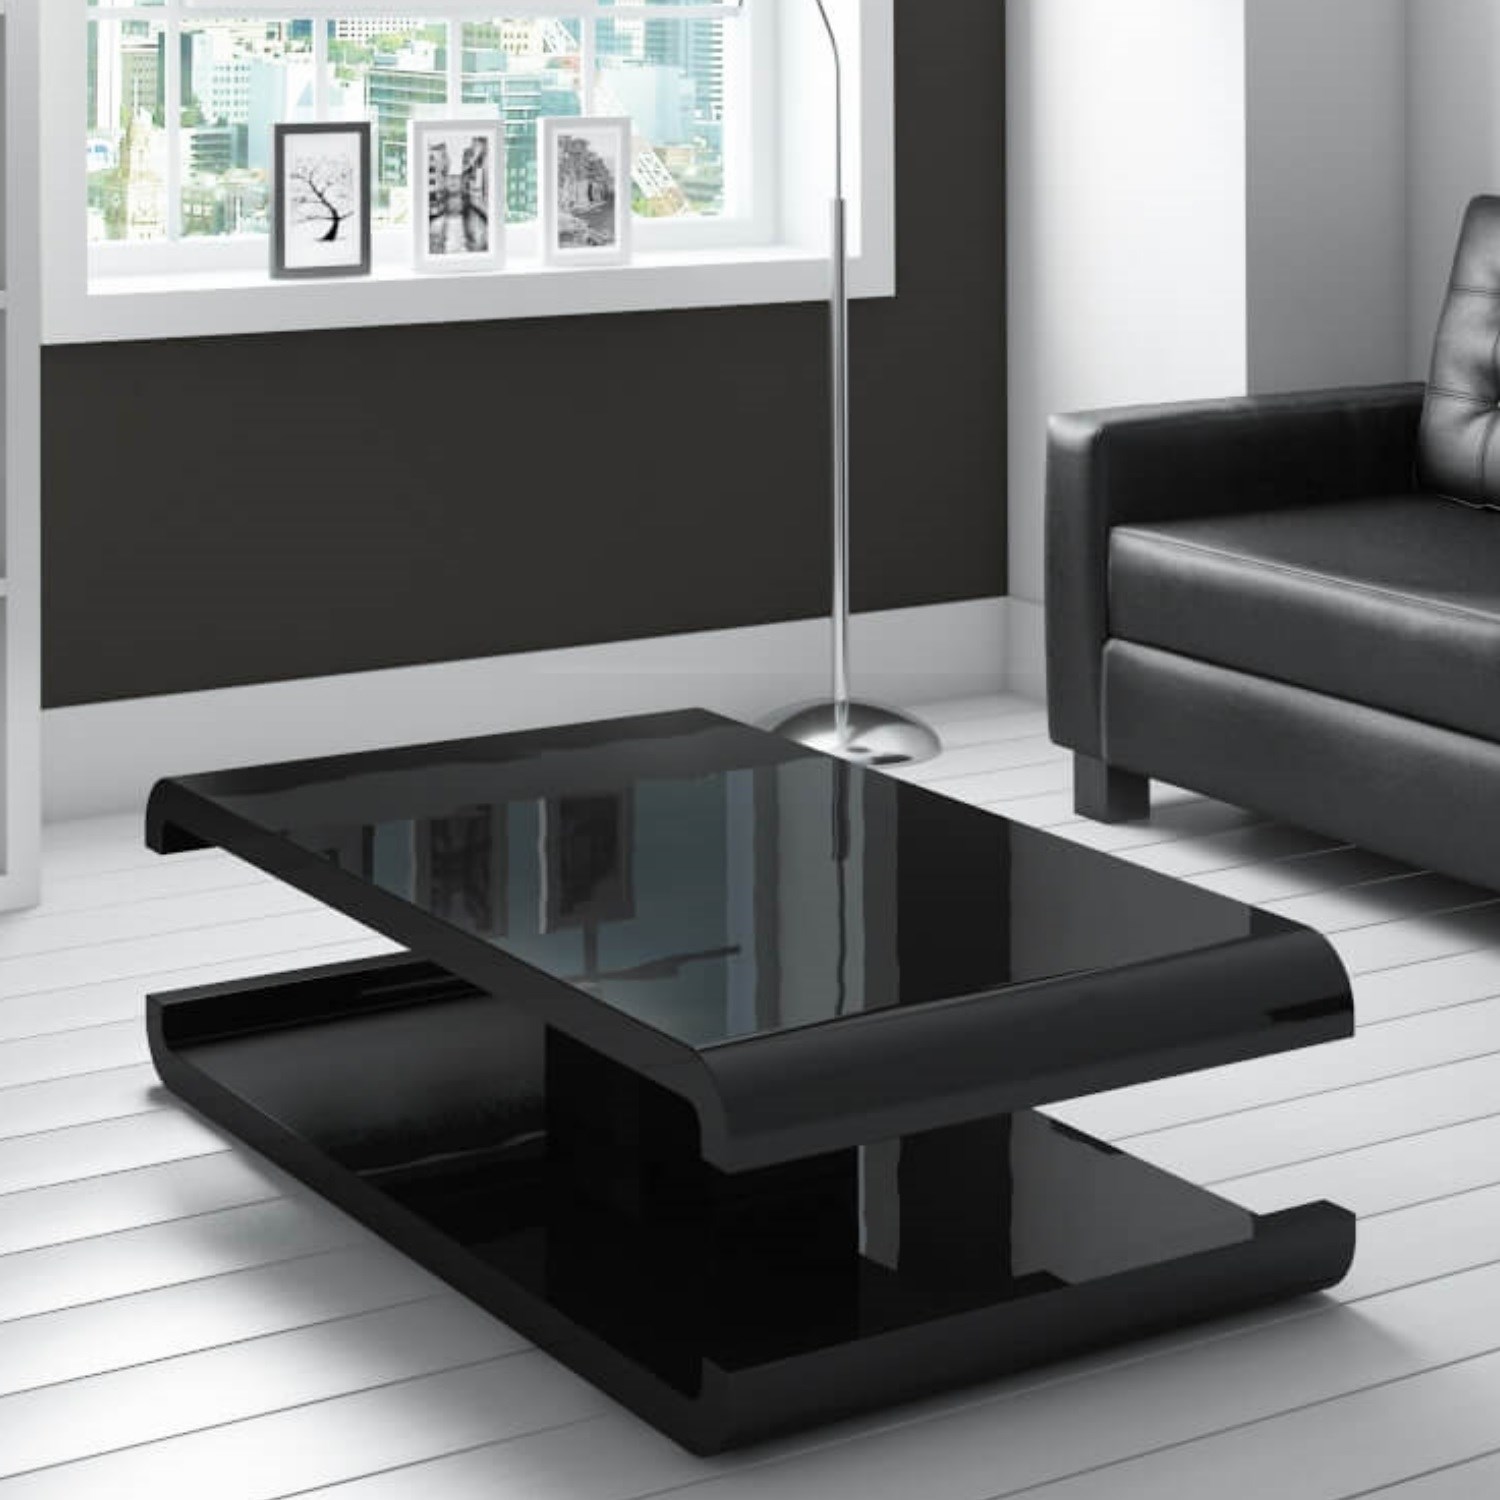 Living Room Furniture: Black Gloss Decoration Solutions That Work